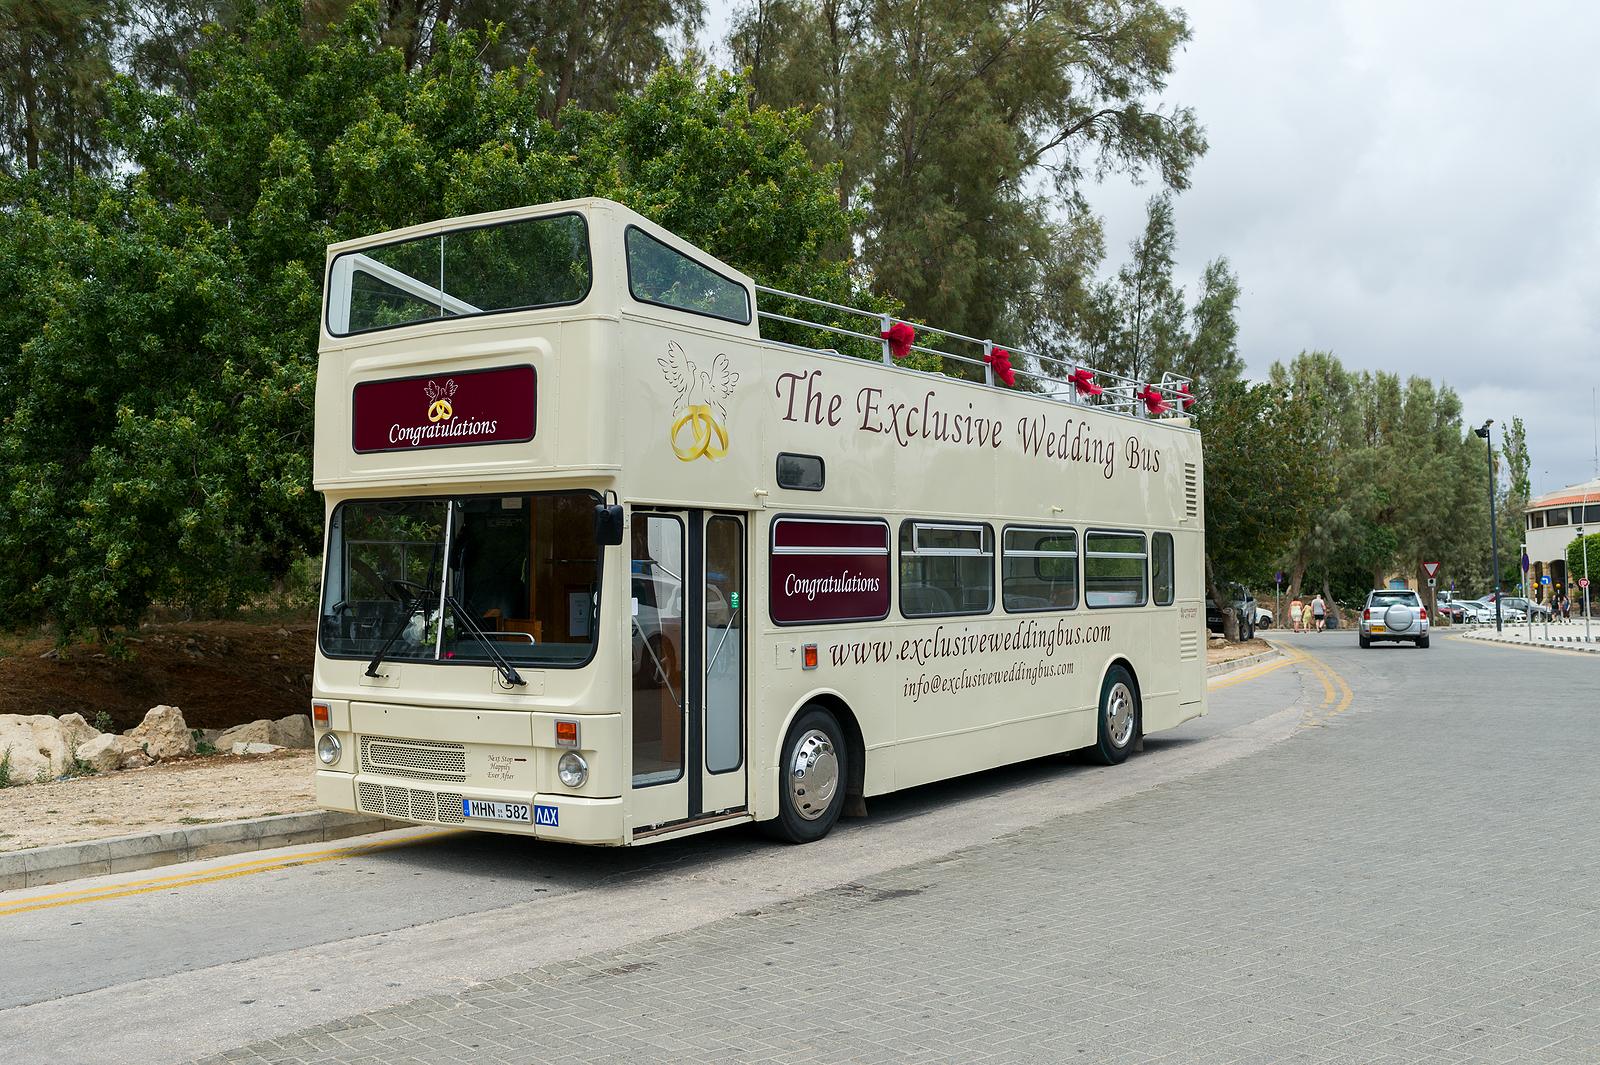 Get Me To The Church: Tips For Choosing Wedding Transport